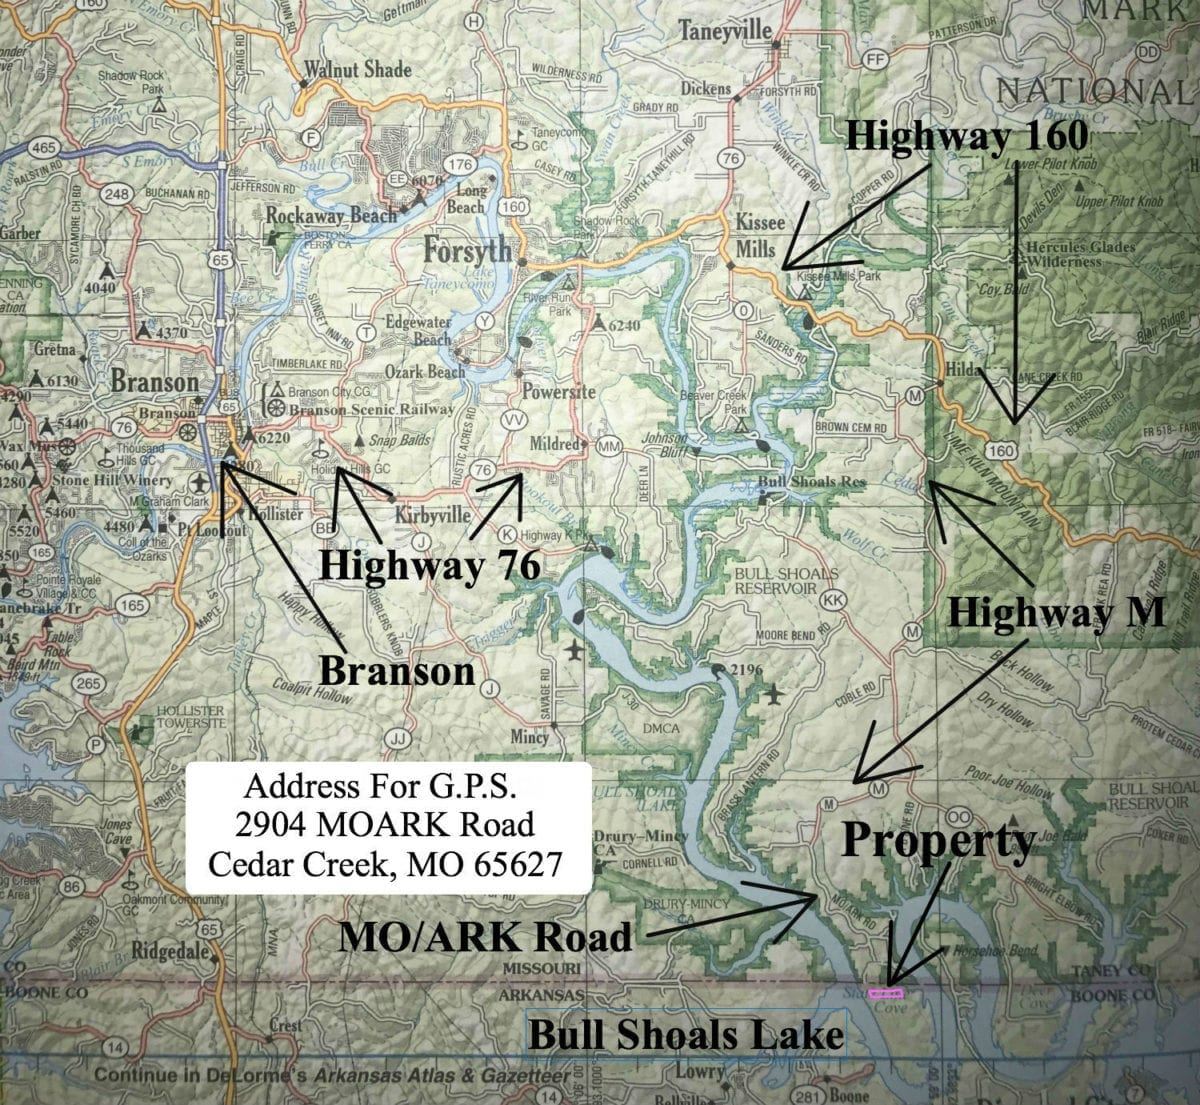 This helpful road map shows the route to the property from Branson, Missouri. Enter the address on this map into your G.P.S. and it should take you to the end of the paved road (Moark Road).